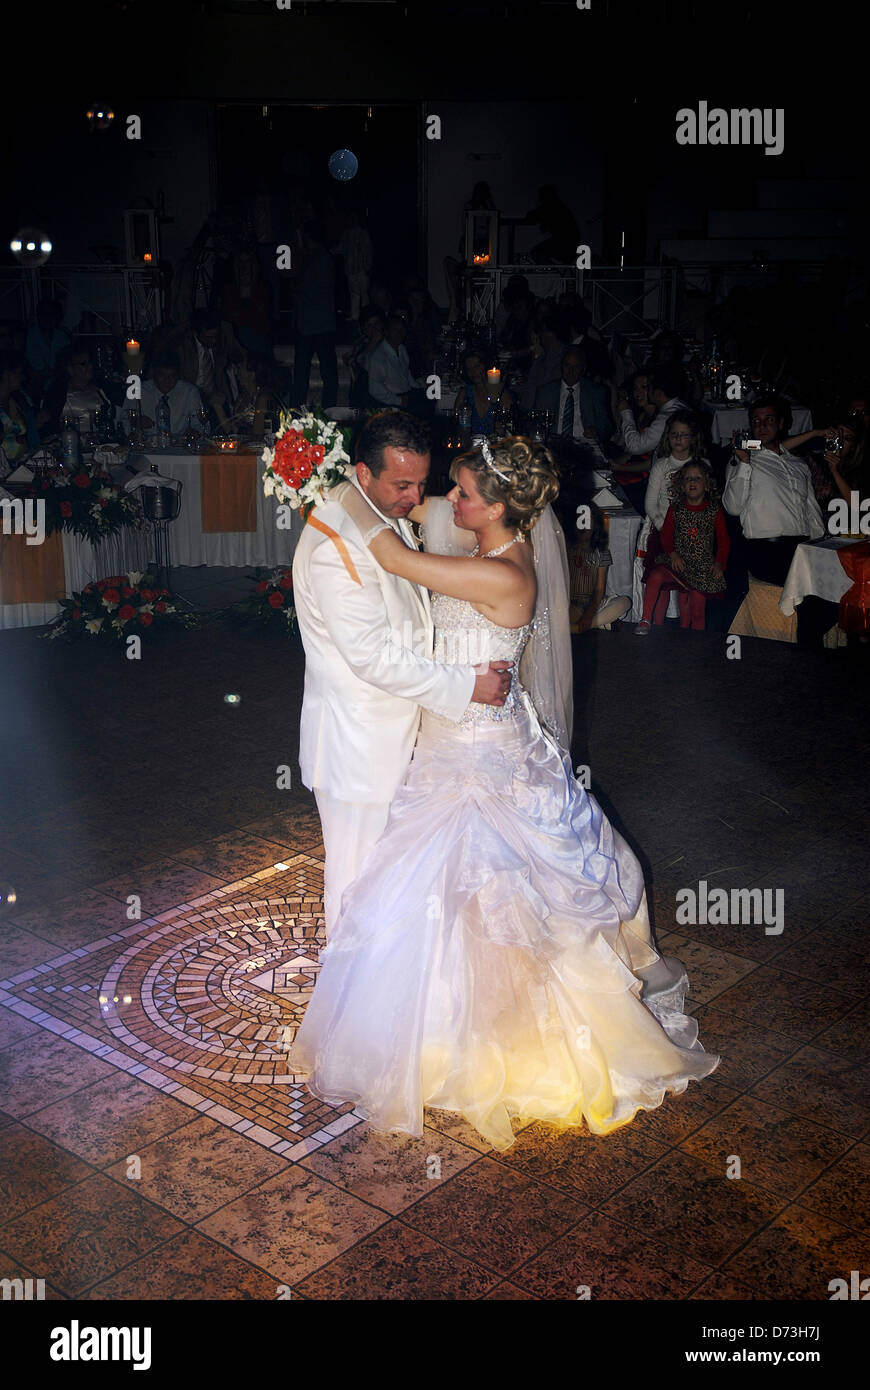 Bride and groom at their first dance on wedding reception (Greece) Stock Photo